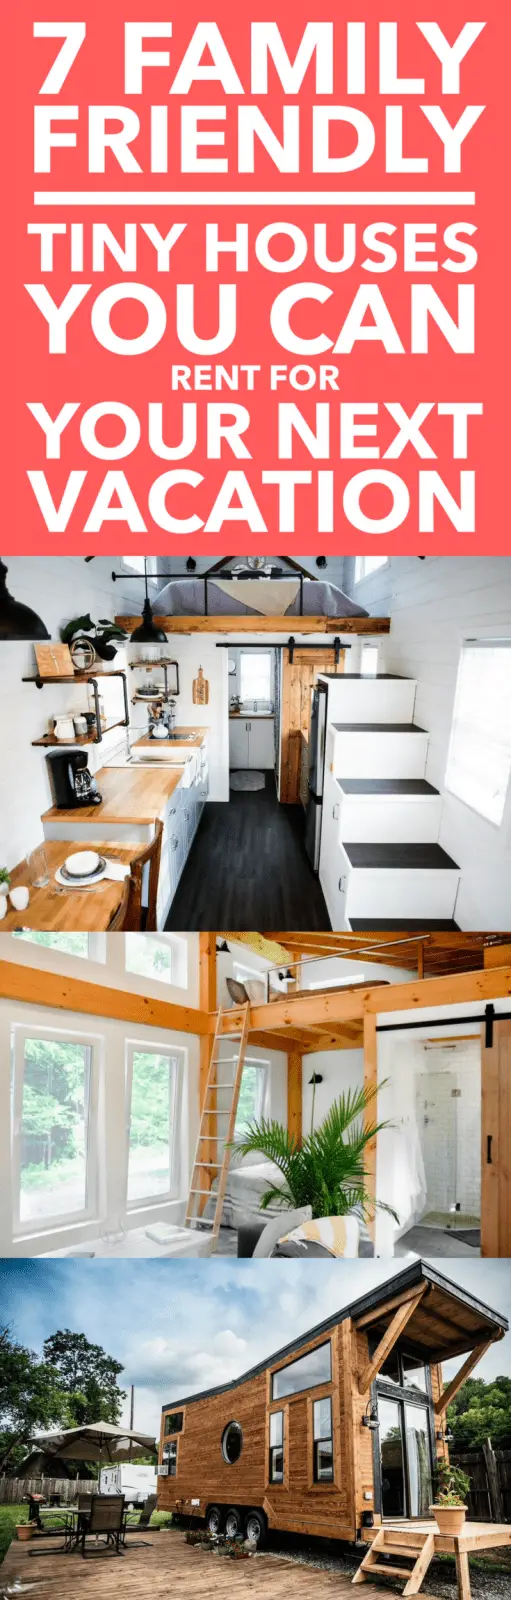 Have you wanted to try out tiny house living but can't imagine living in a small space full-time? Check out these amazing tiny house rental properties in the US that would be perfect for your next family vacation! Tiny house vacation rentals give you an chance to enjoy the amazing interiors and space saving designs without having to 'live tiny' yourself! #tinyhouse #tinyhousevacation #tinyhousevacationrental #familyvacation #travelwithkids #wanderlust #tinyhouserental